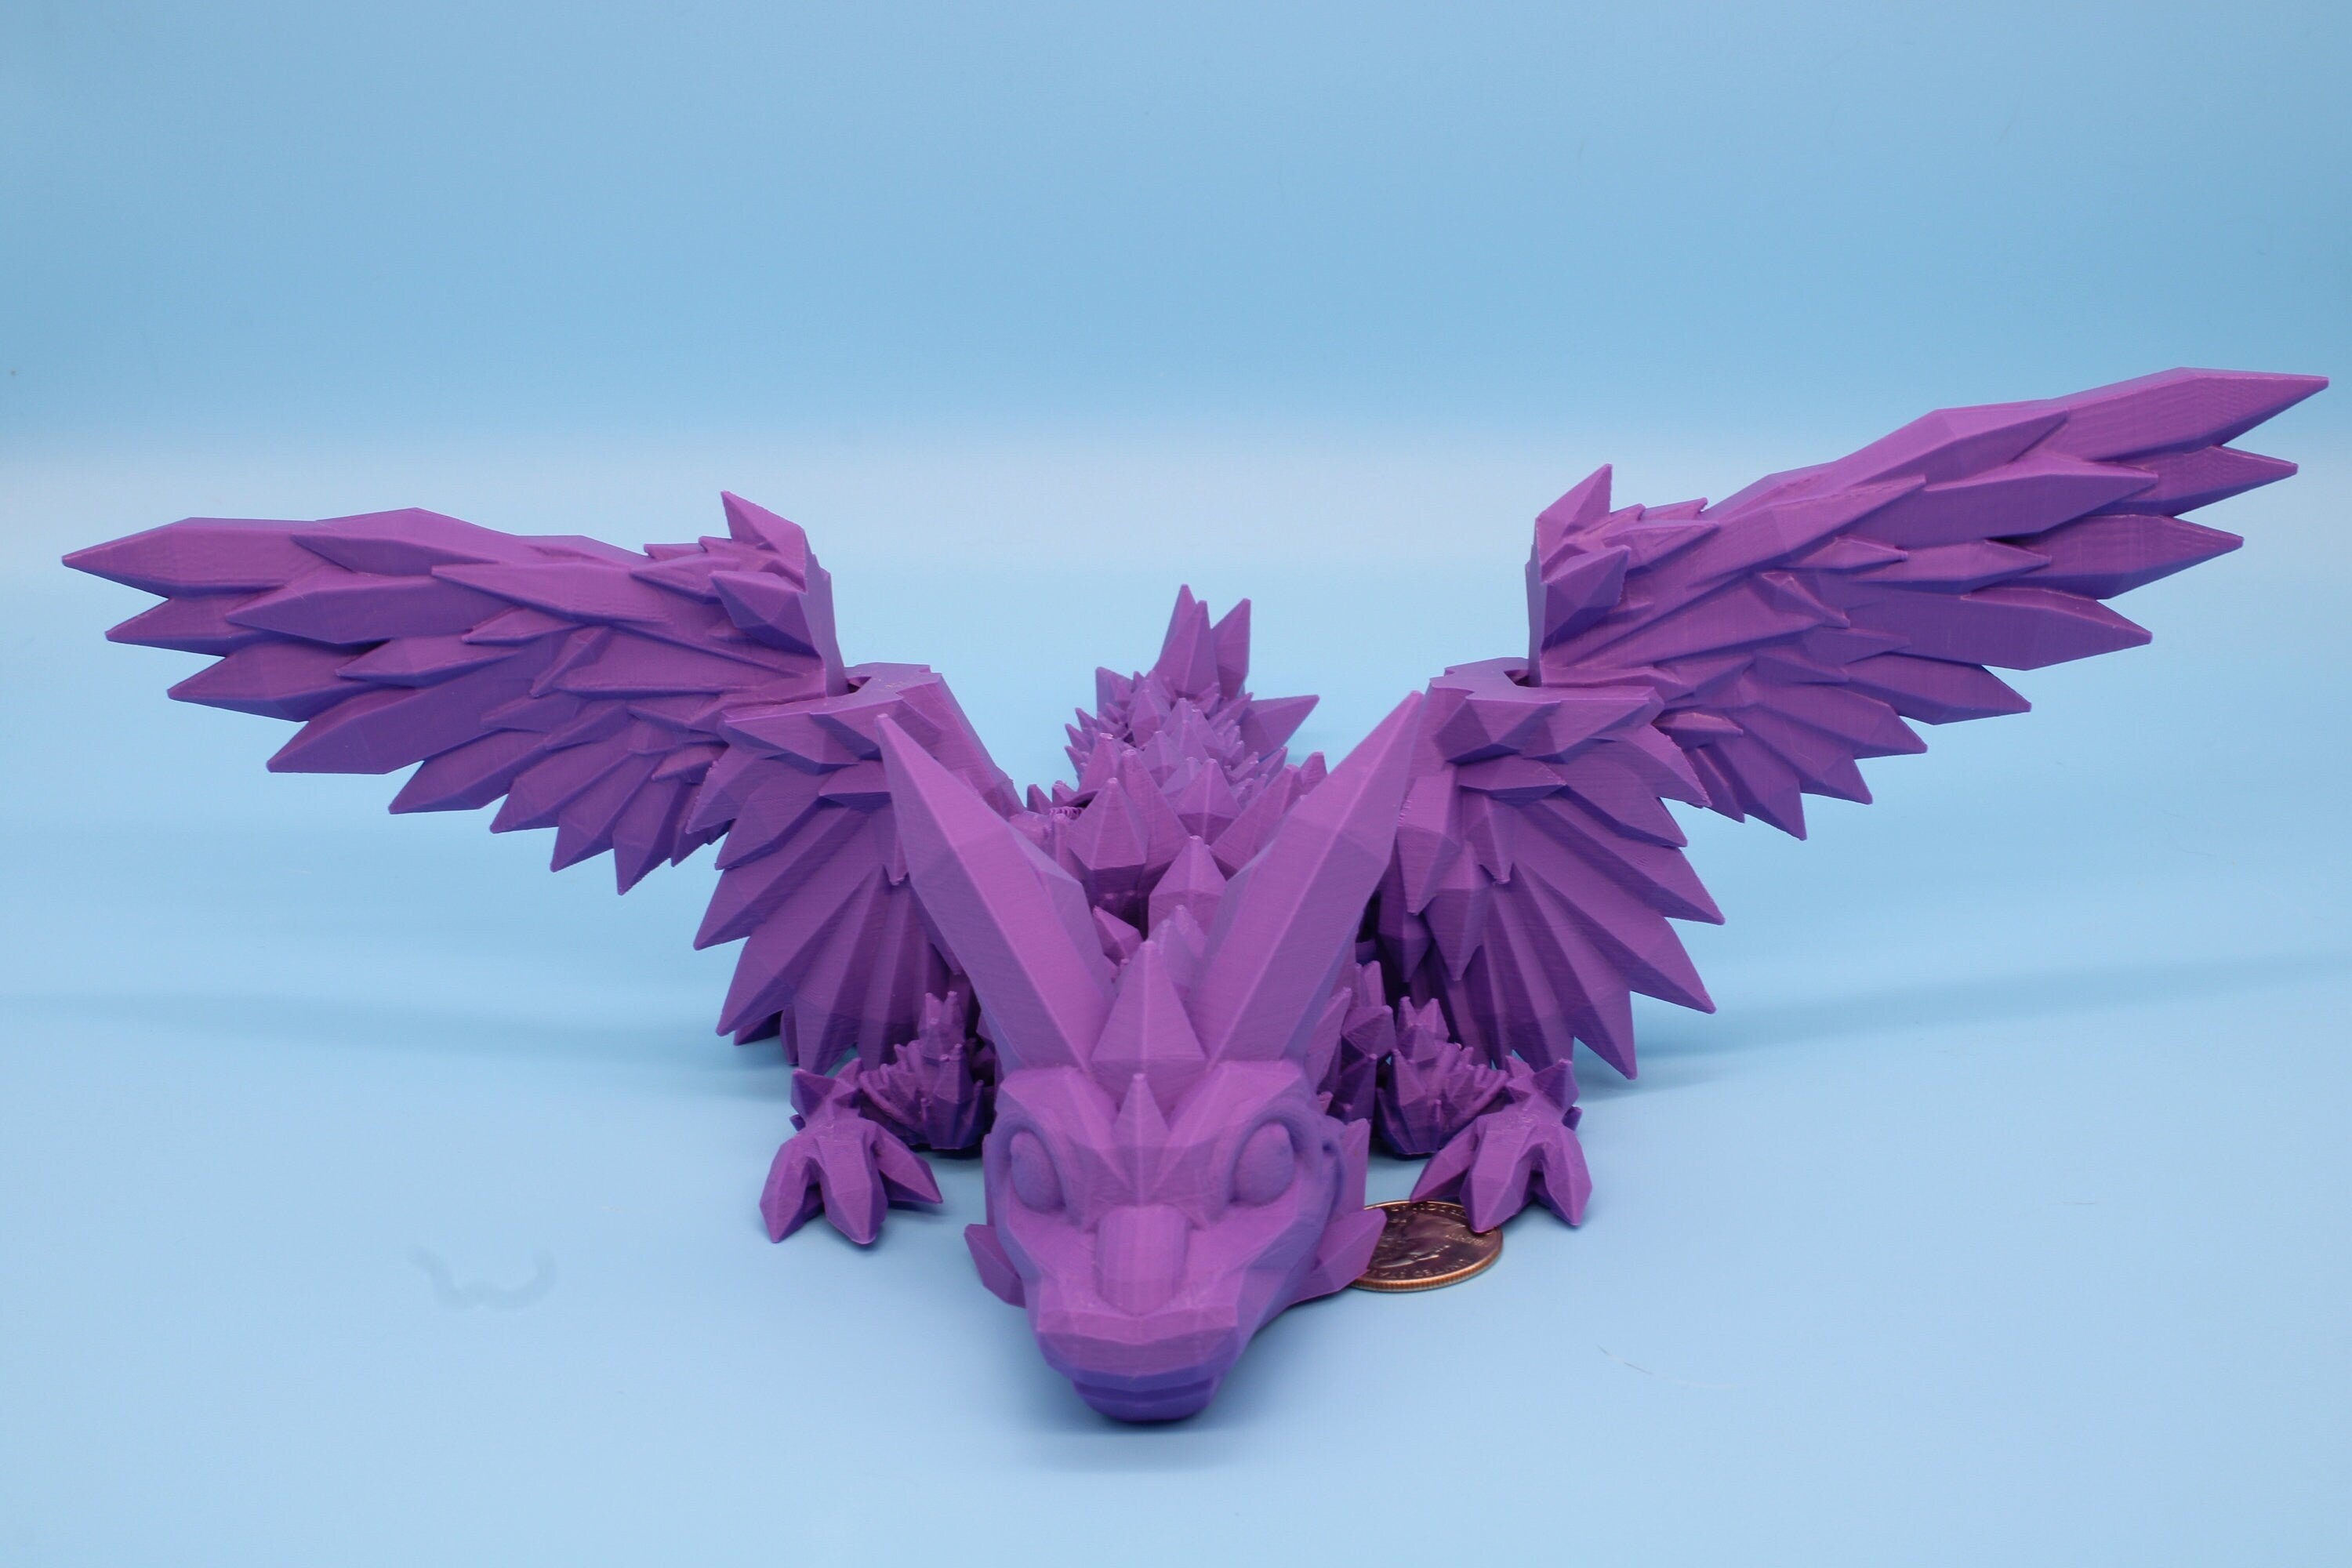 Purple Baby Crystal Winged Dragon. 3D printed articulating dragon Fidget, Flexi, Toy 11.5 in. Stress Relief, Gift.